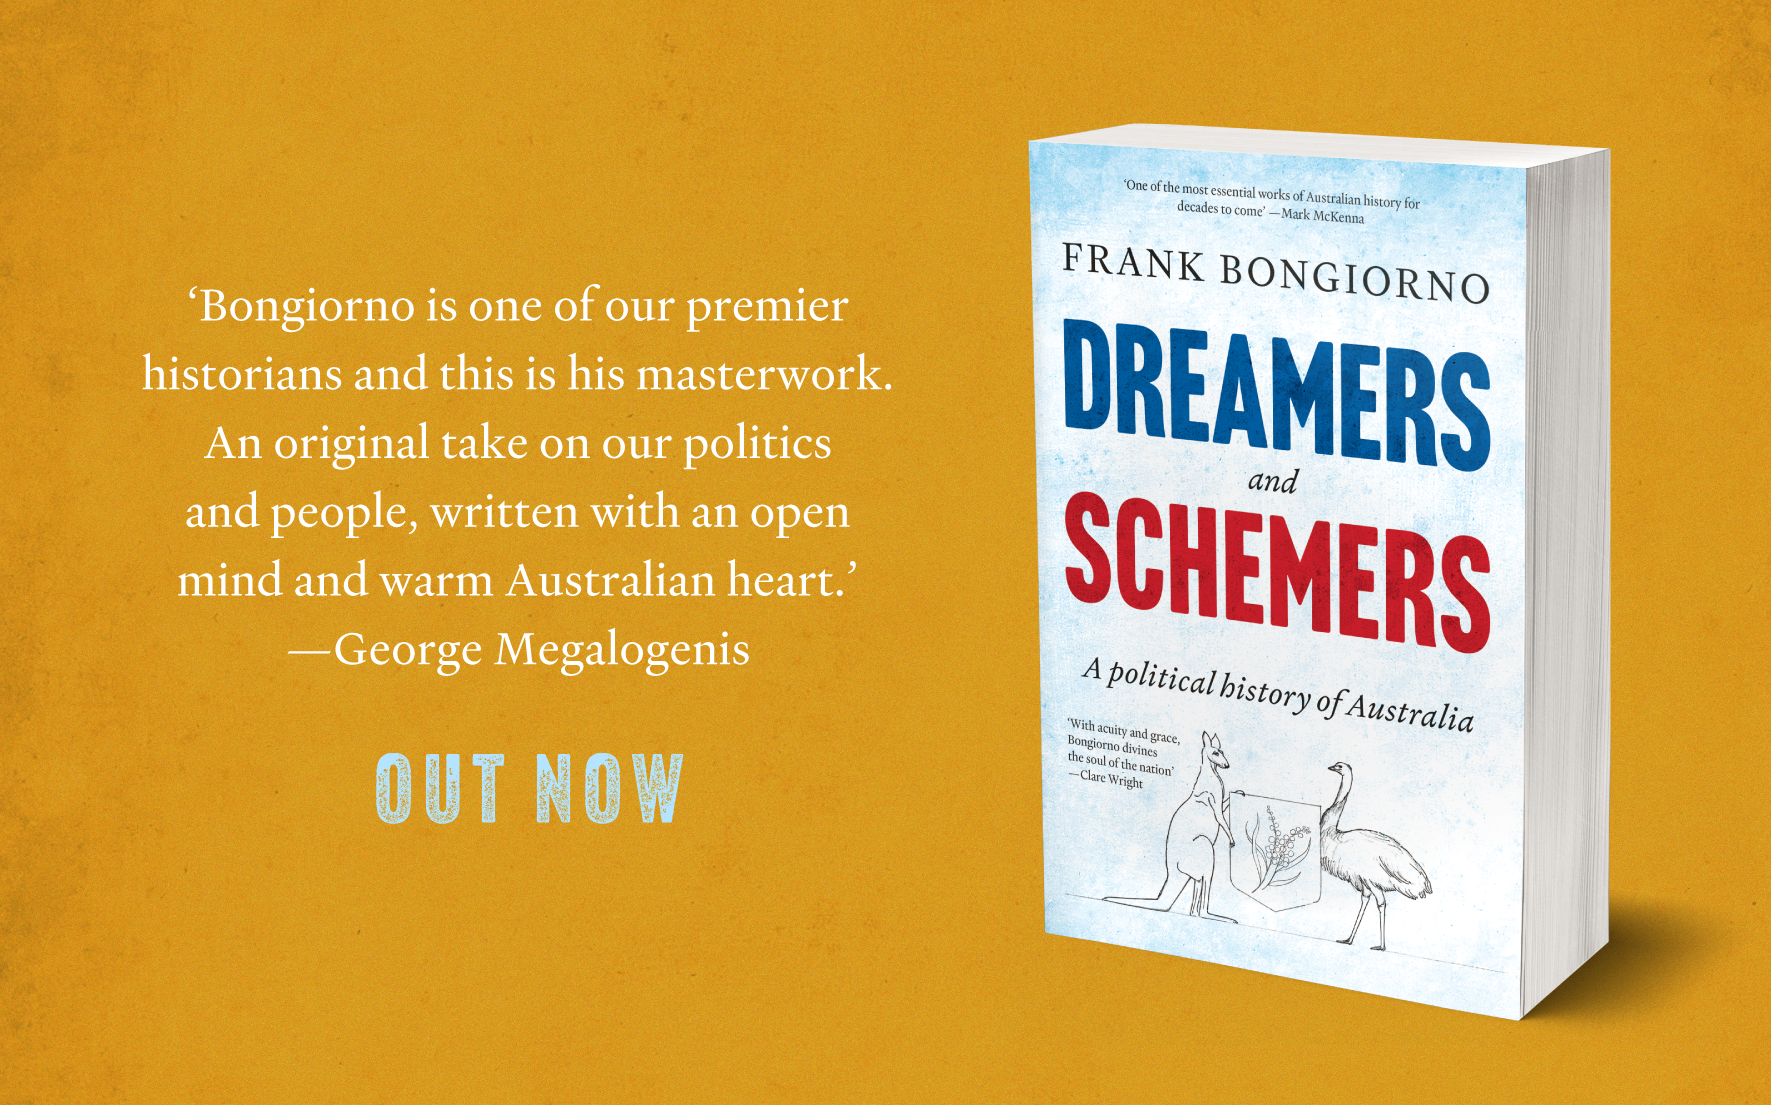 Out now: Dreamers and Schemers